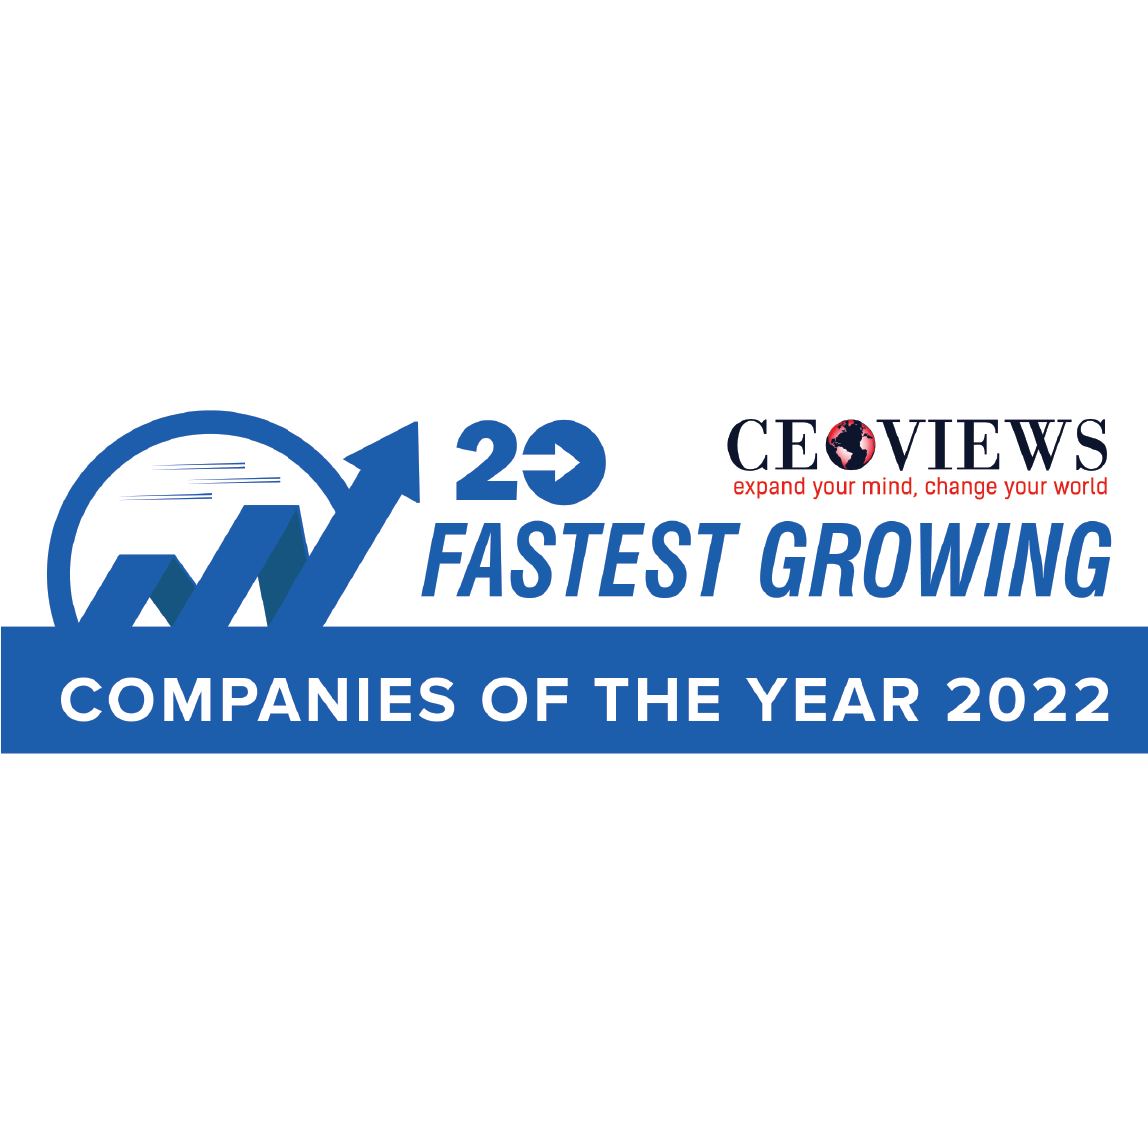 20 Fastest growing companies of the year 2022